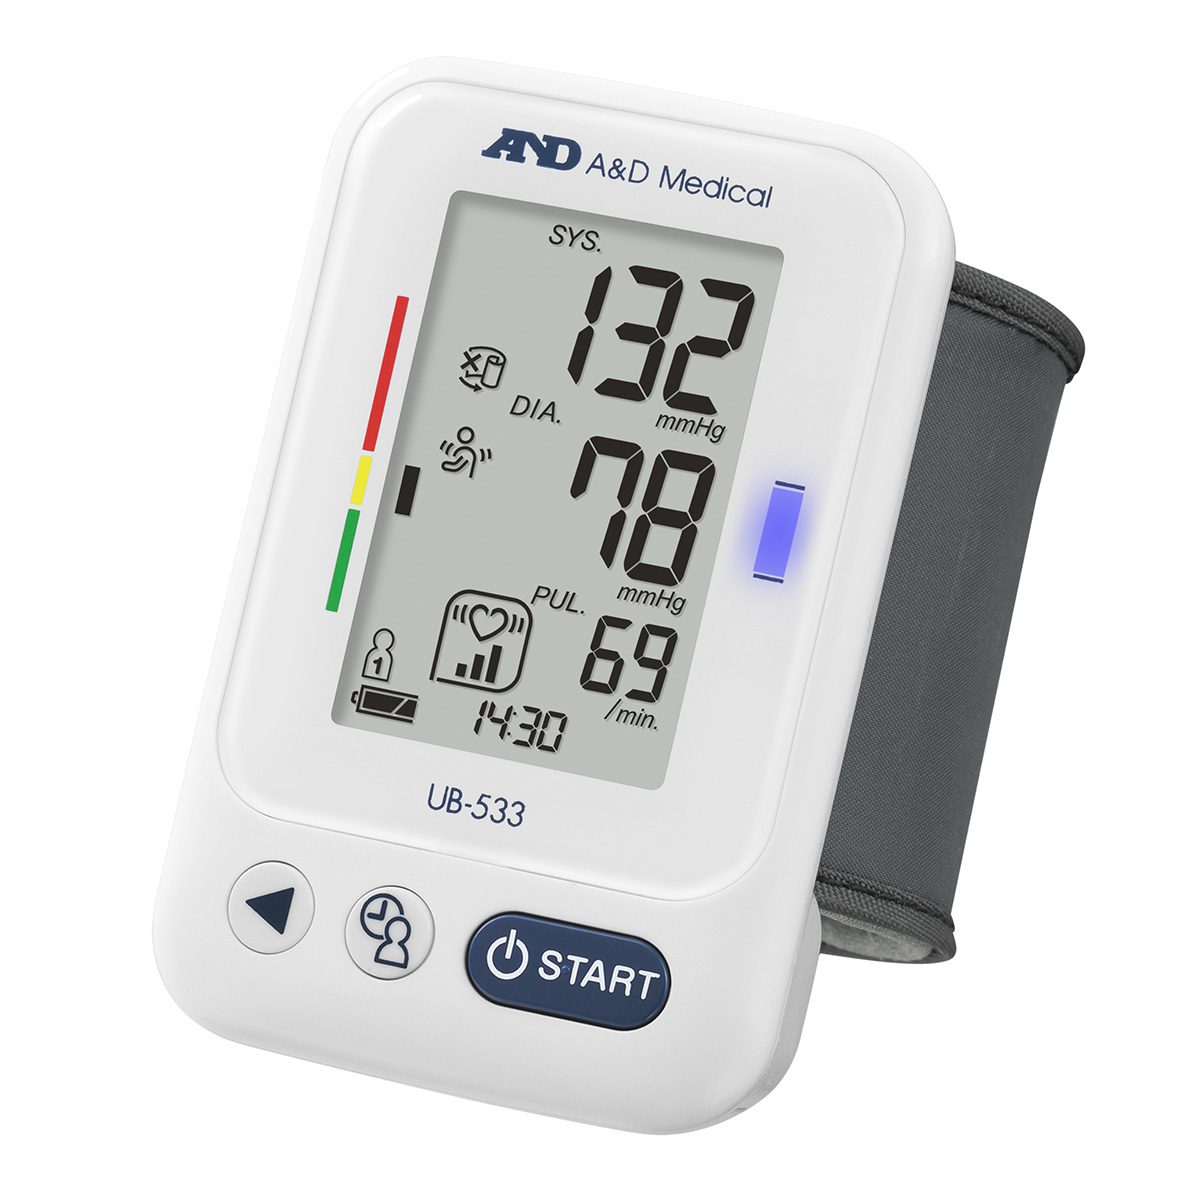 Omron HBP-1320 Blood Pressure Monitoring Clinical Professional